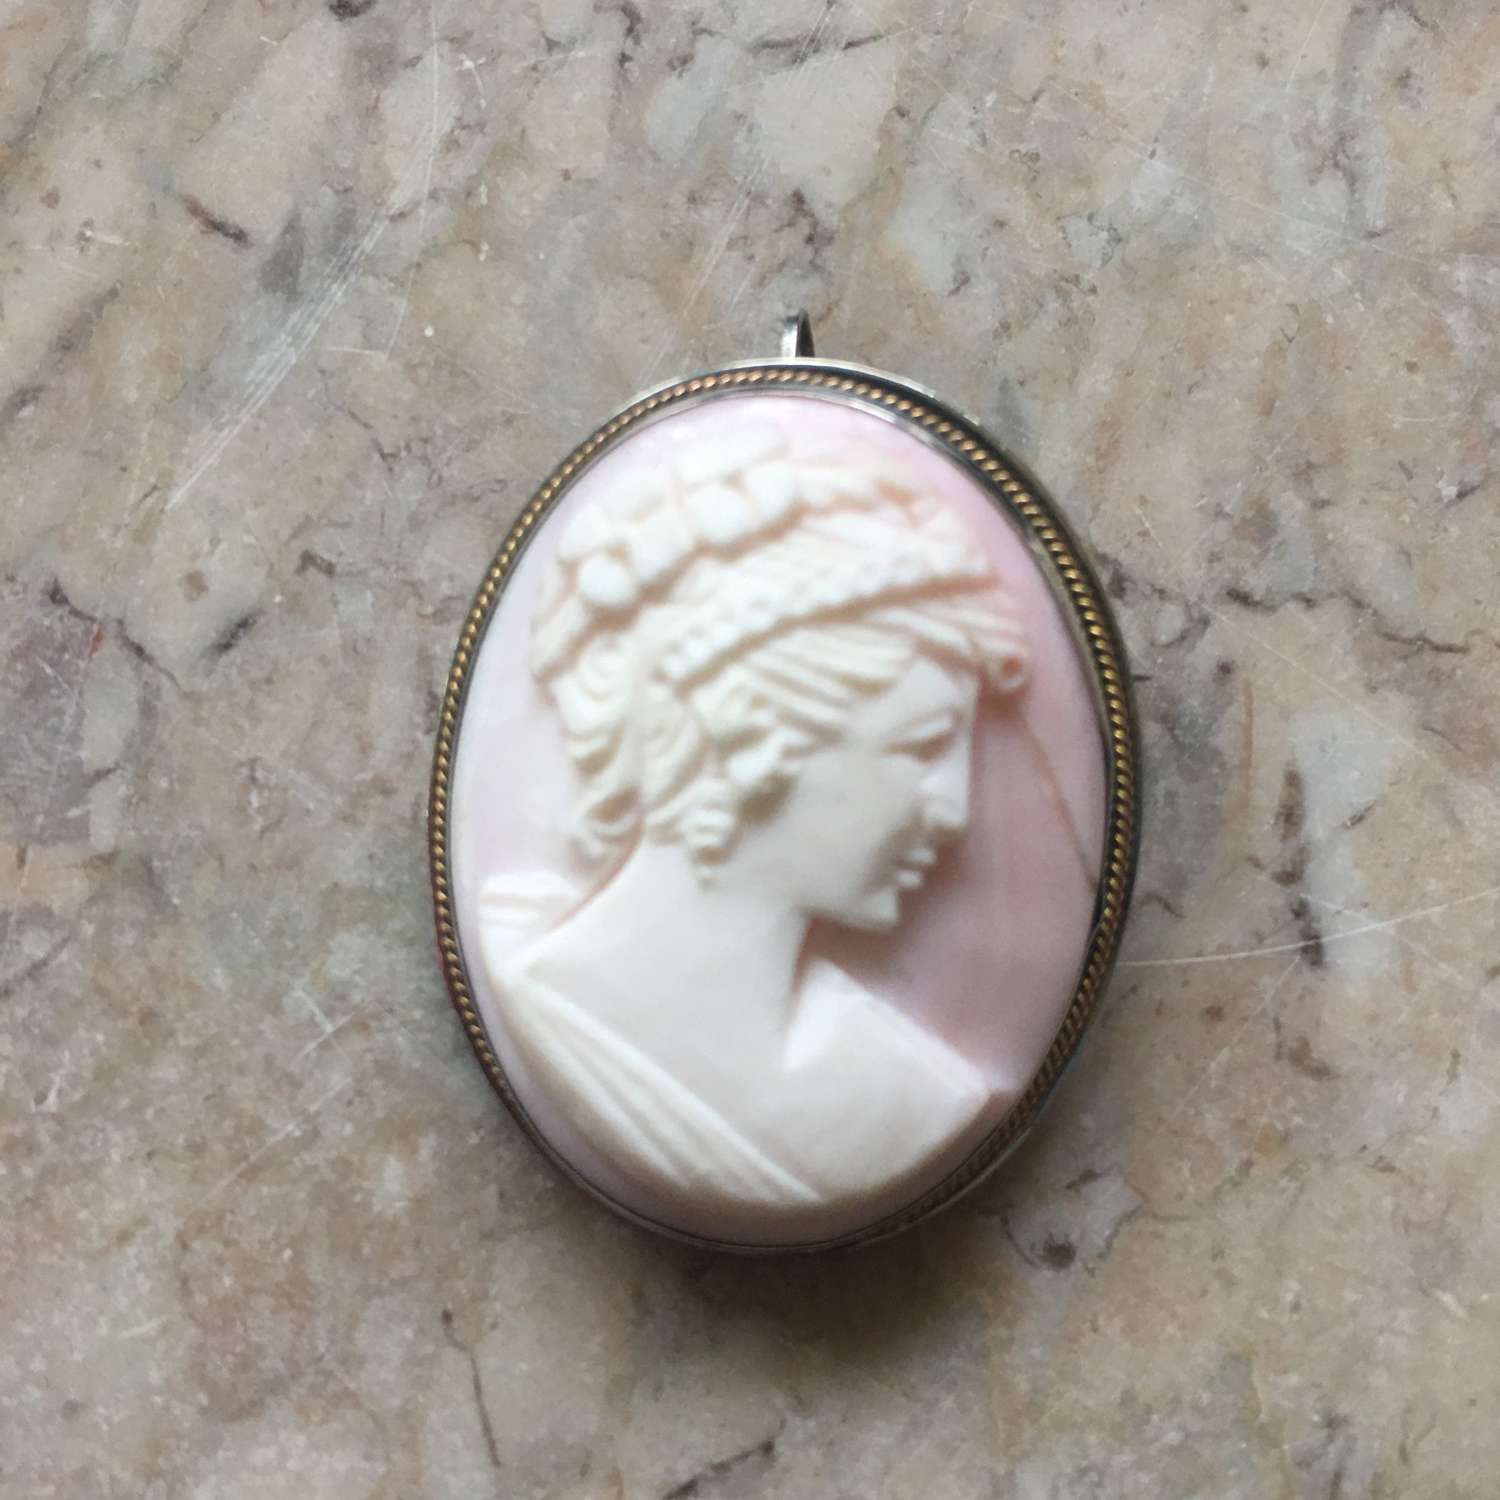 Antique angelskin cameo pendant/brooch c 1900s